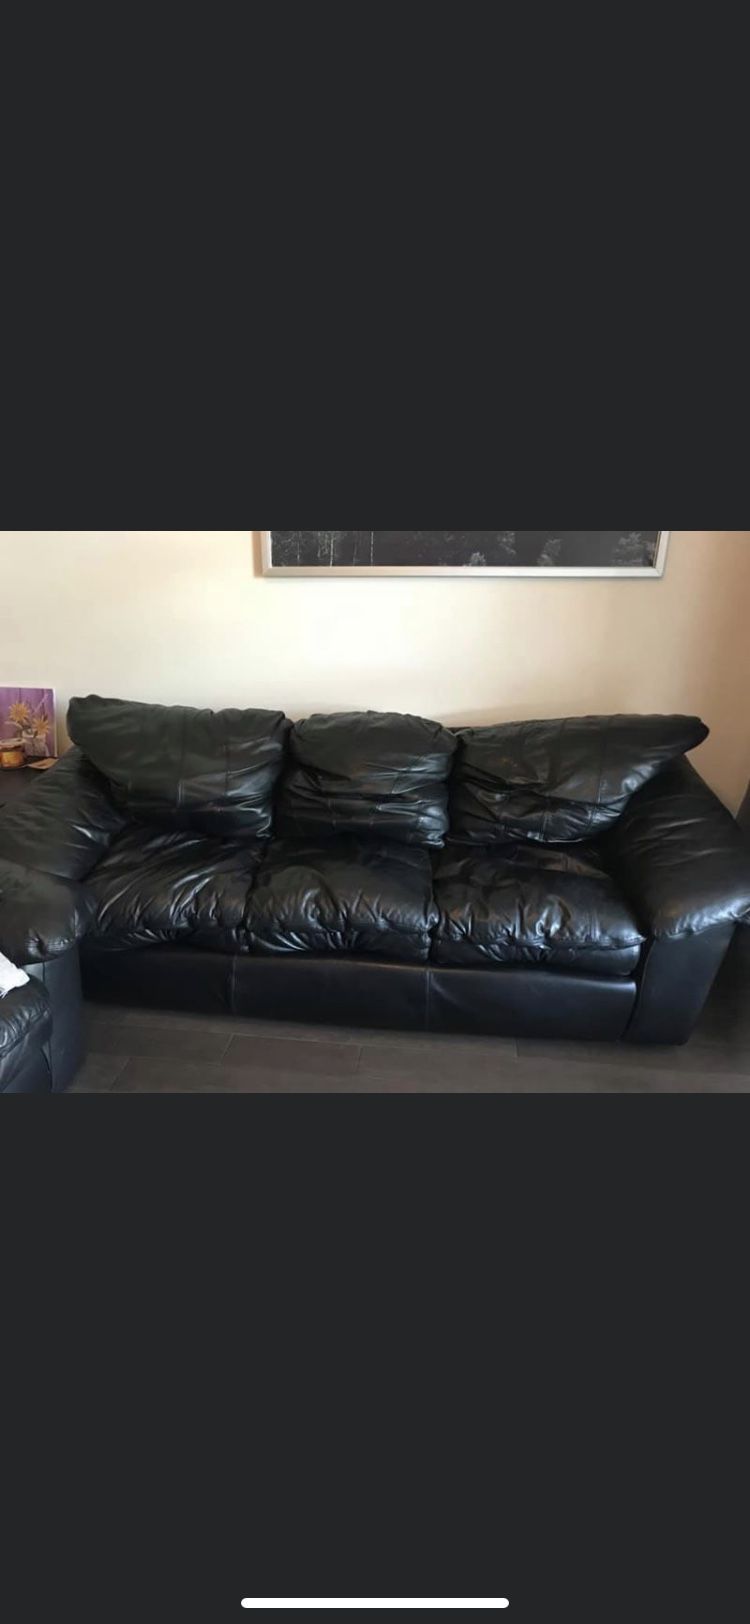 Black leather couches